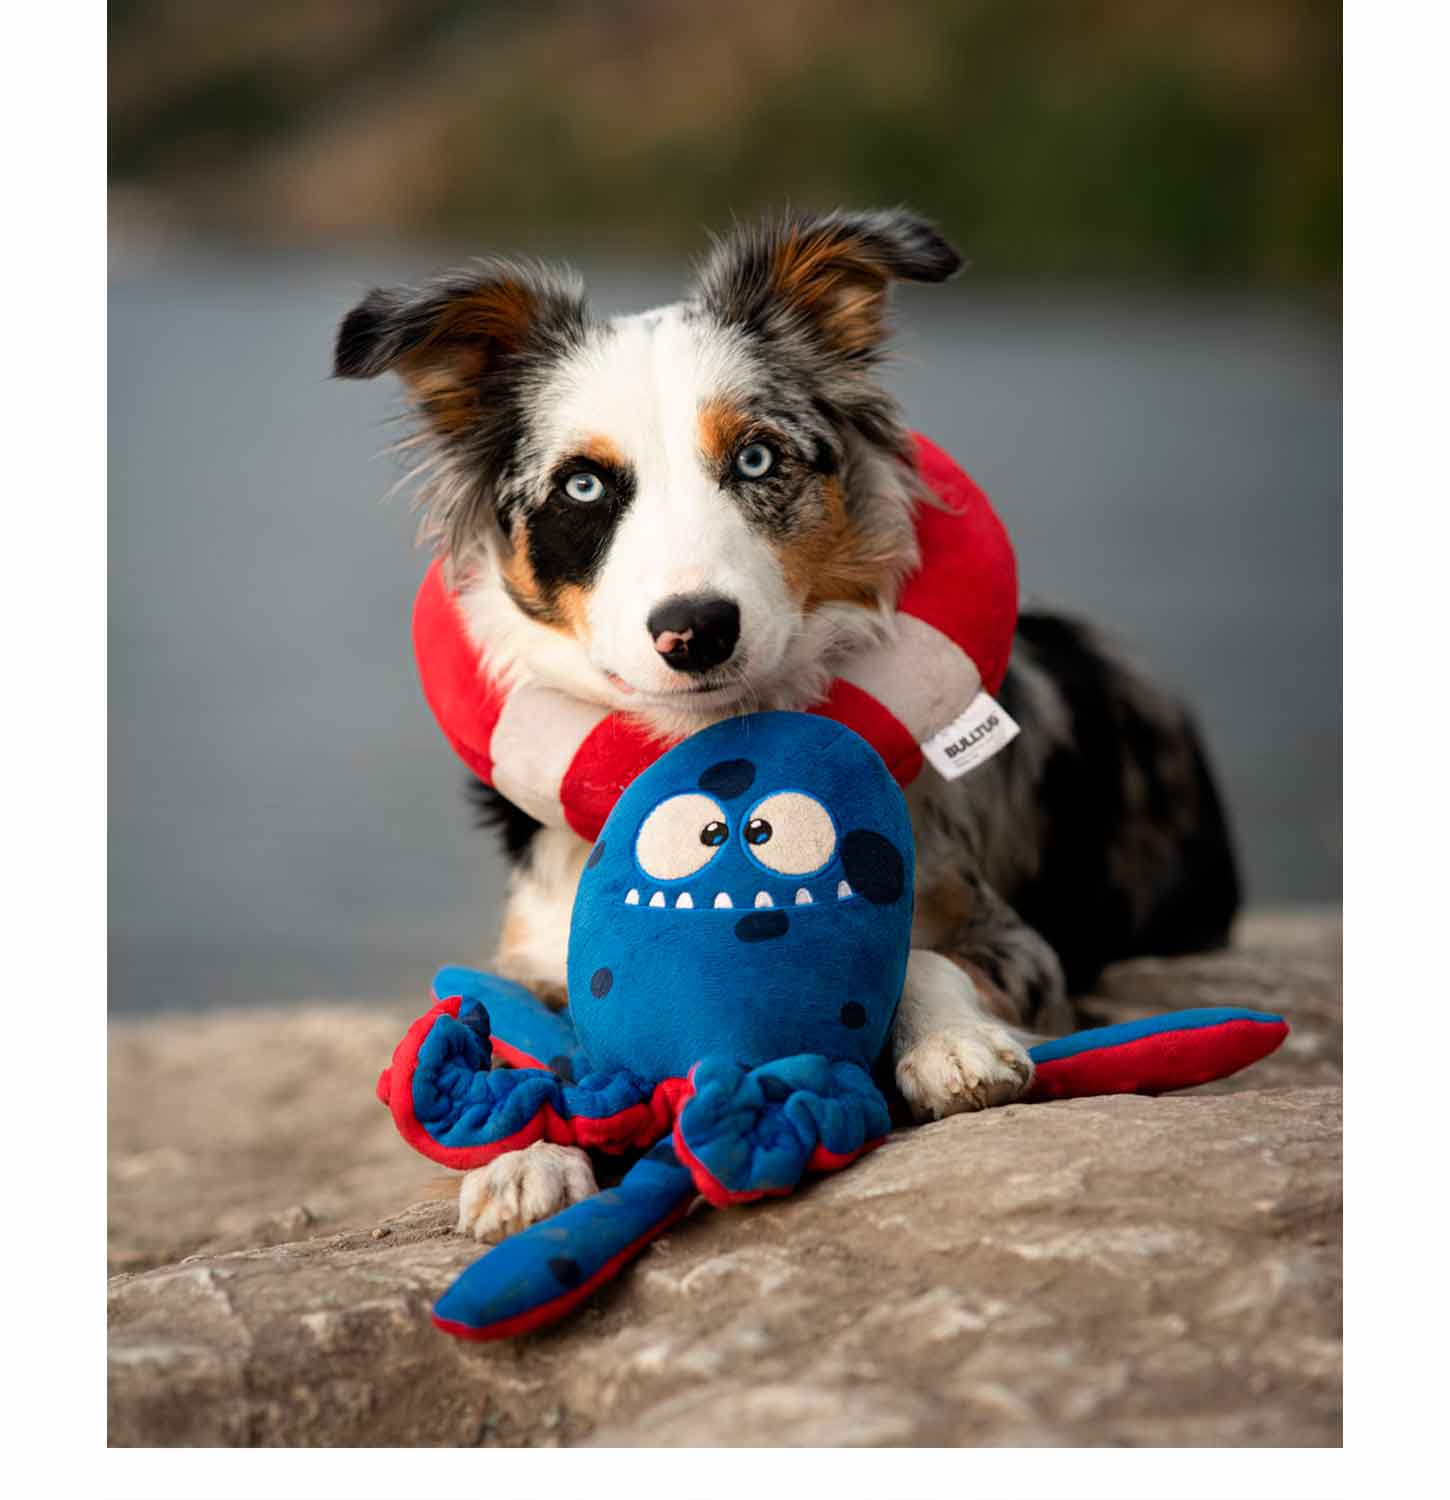 Cute Aussie Dog playing with Tugtopus The Octopus Dog Toy and Wearing The Squeaky Life Ring.